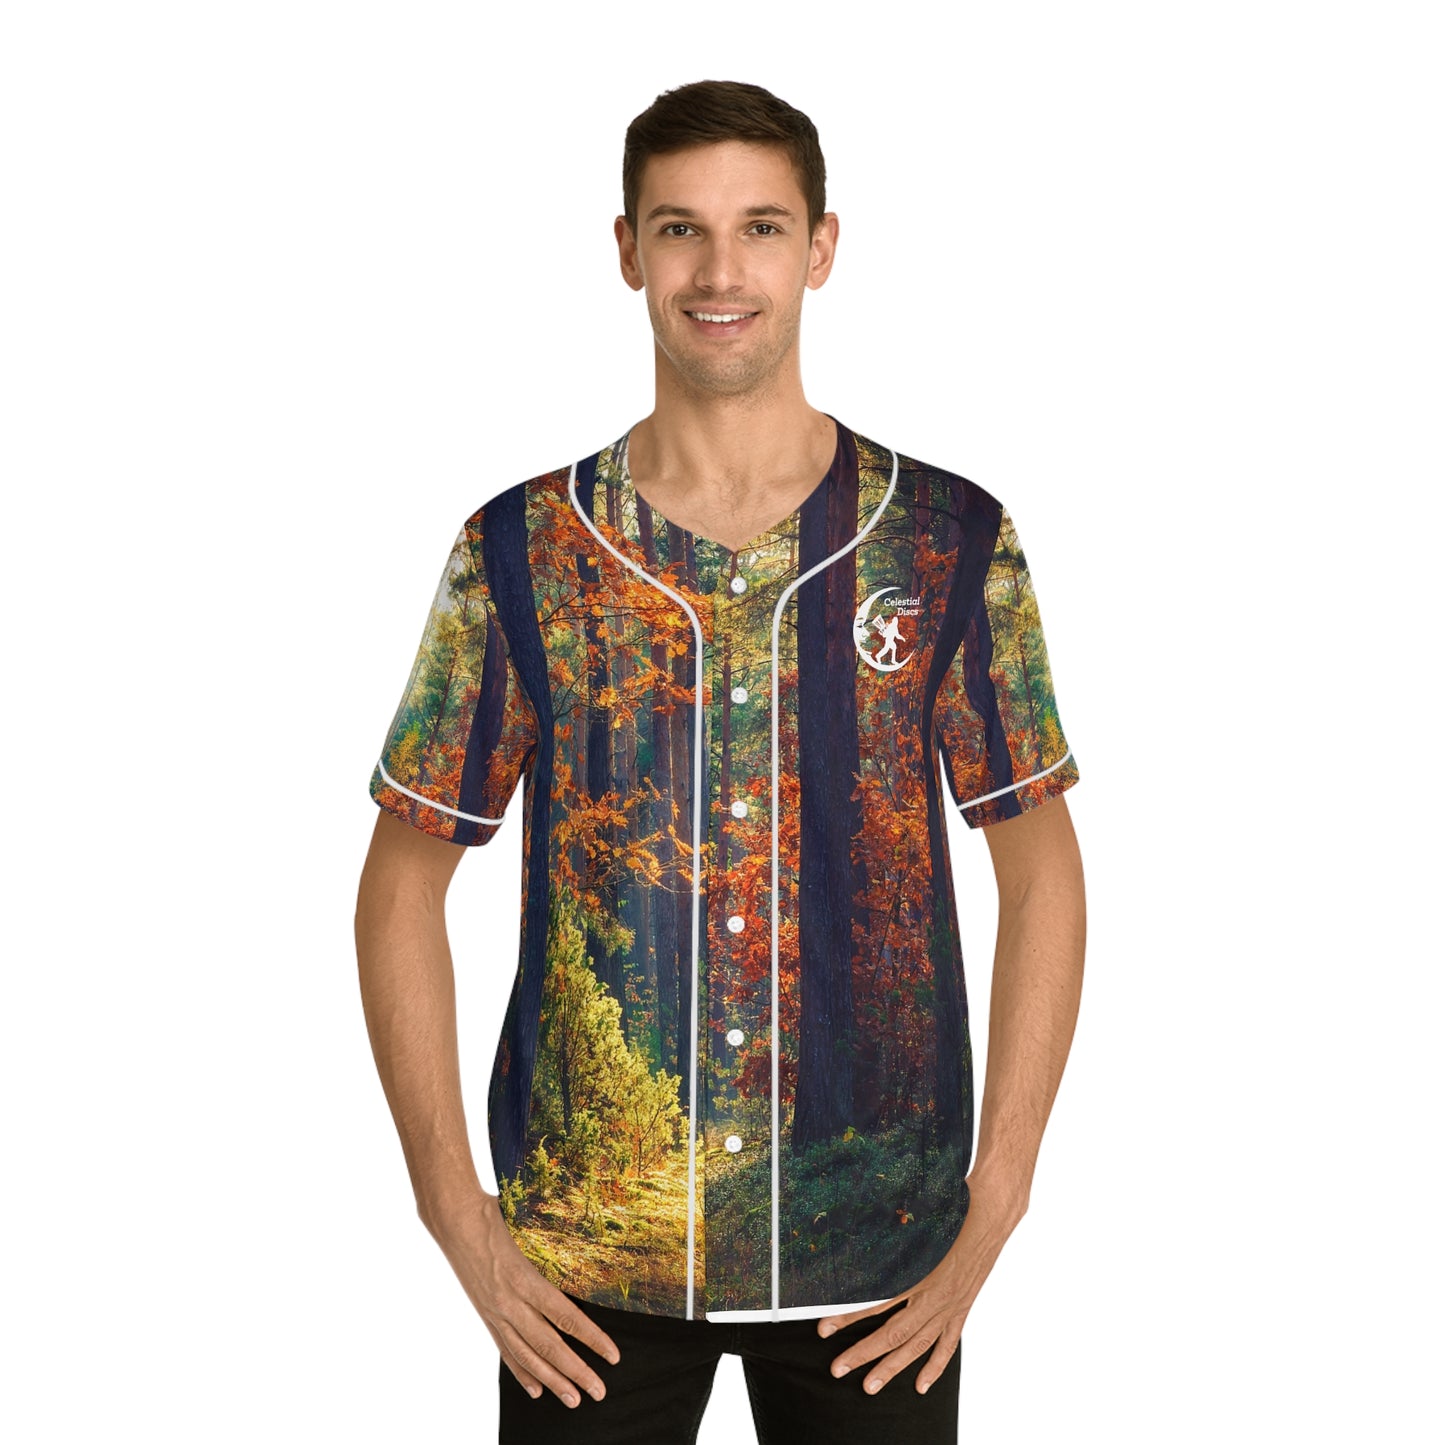 Wooded Men's Baseball Jersey Disc Golf Apparel by Celestial Discs